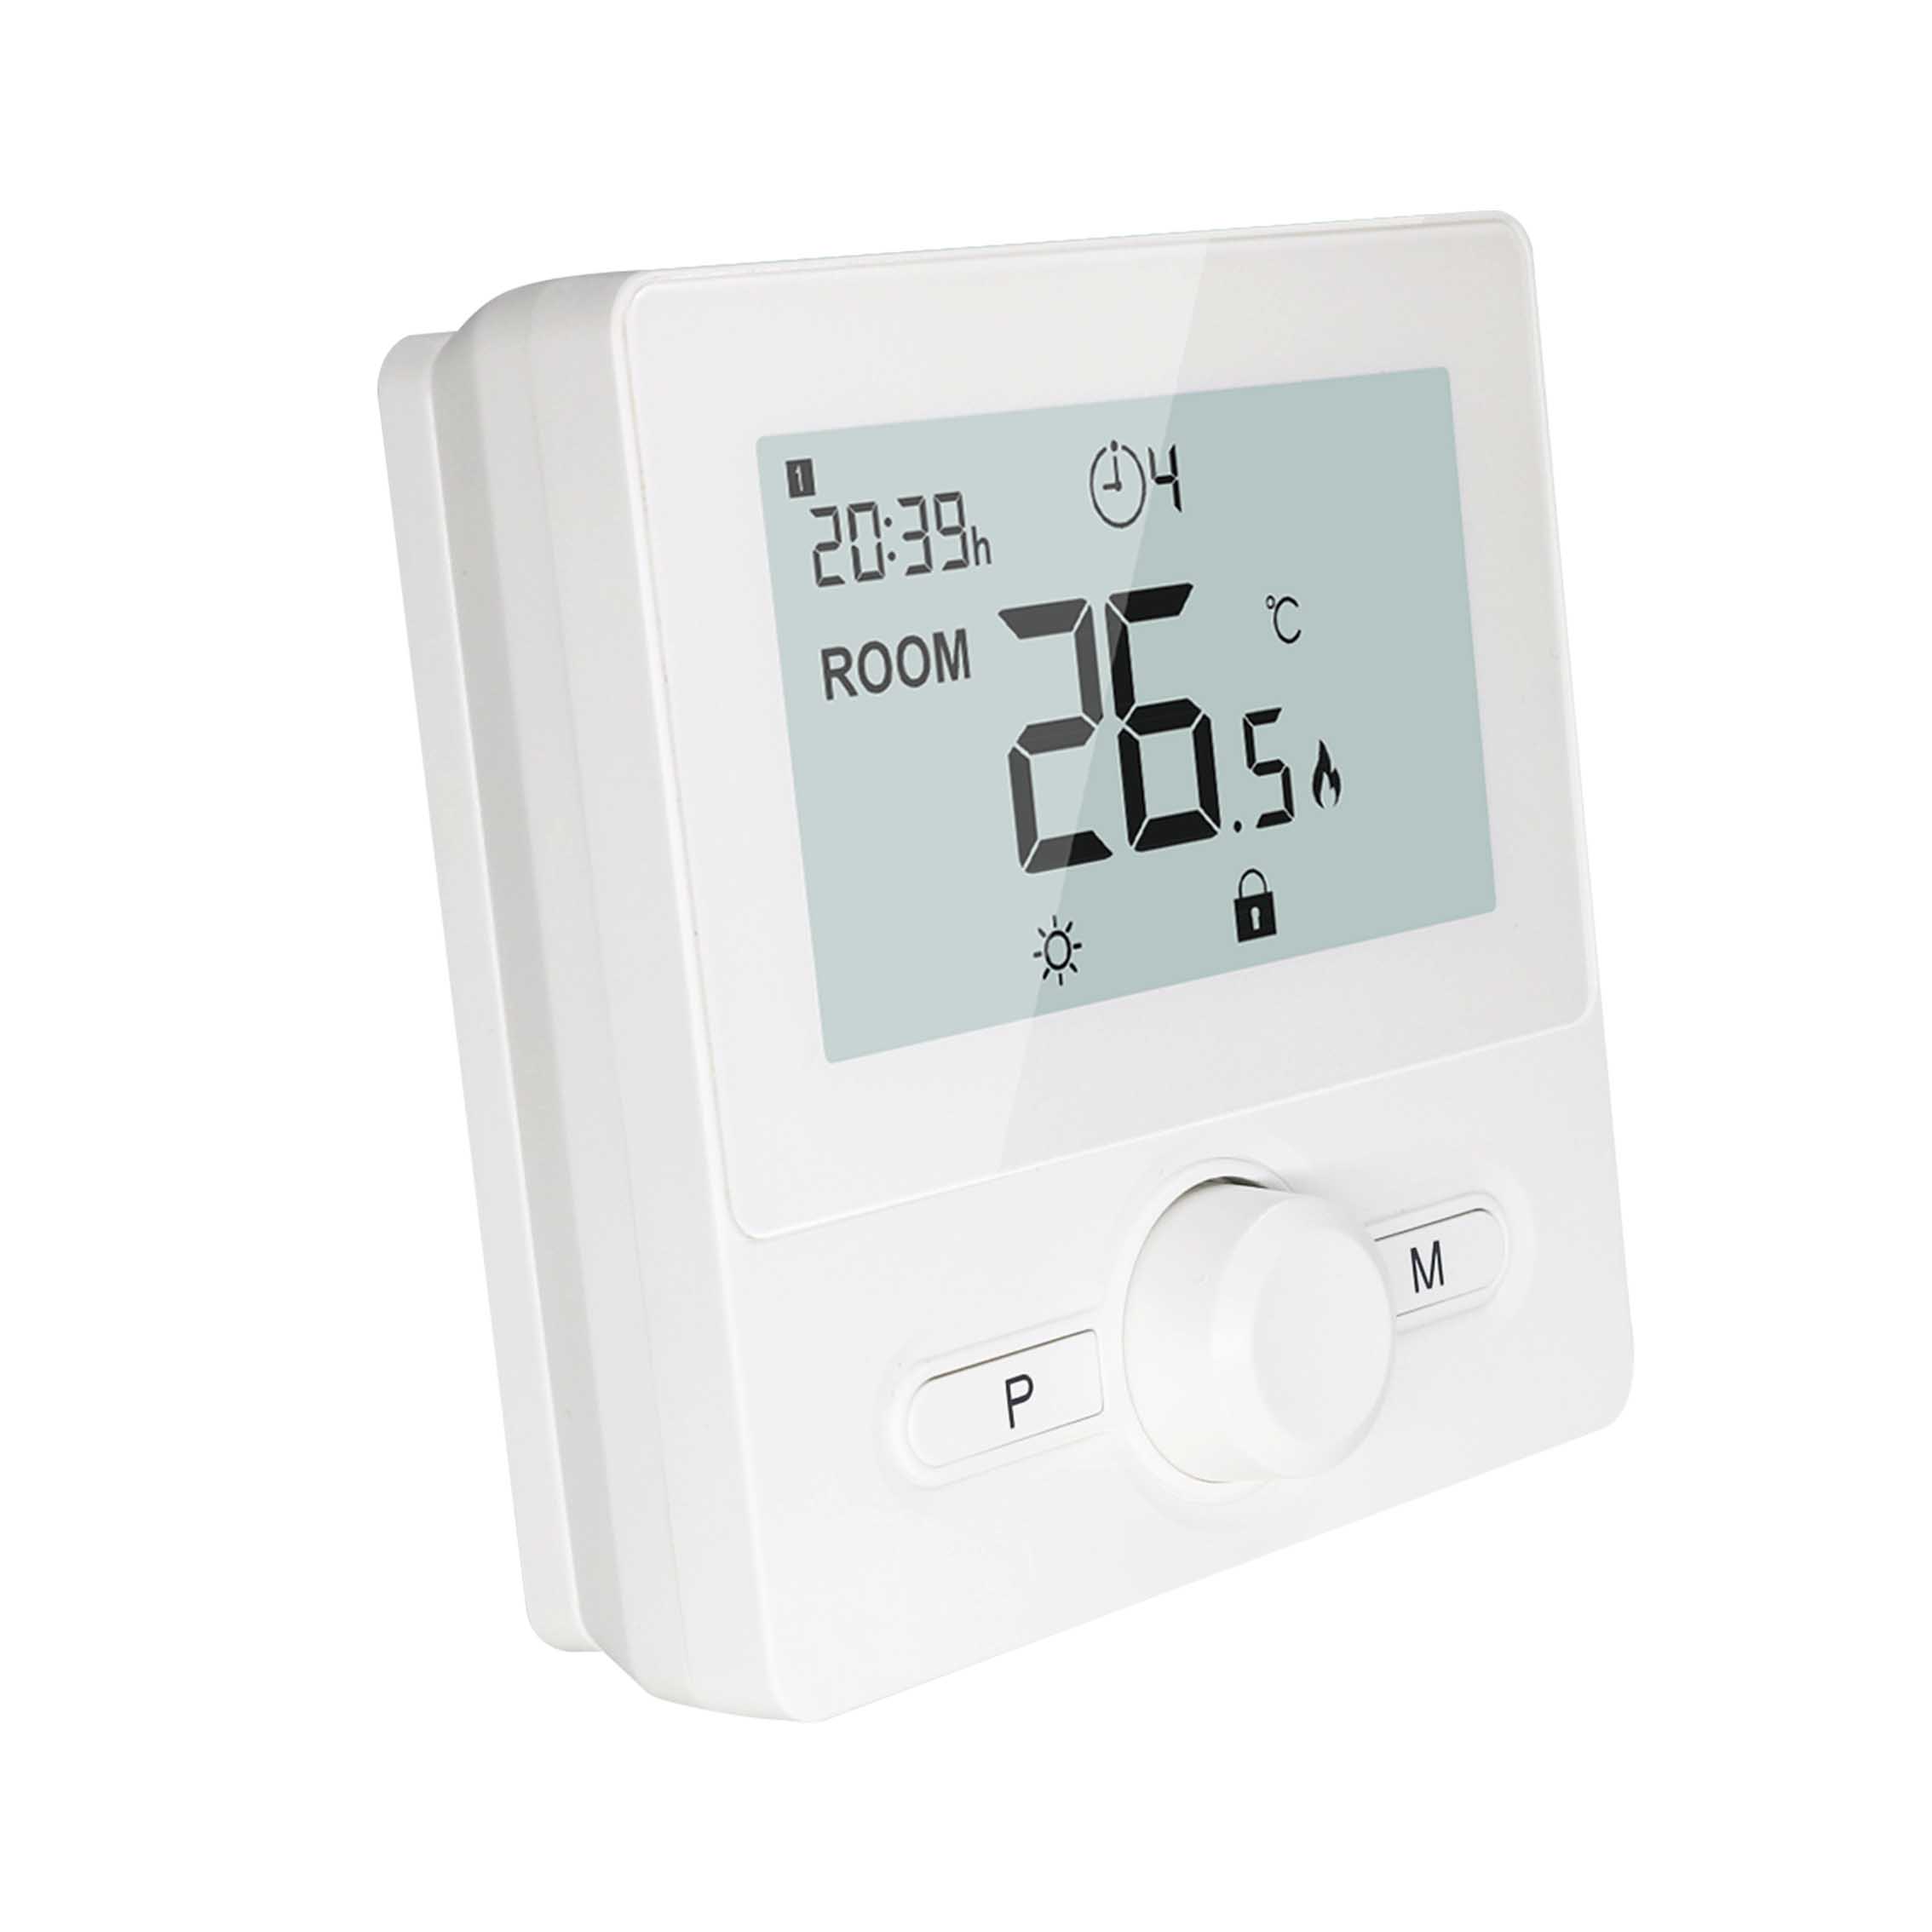 Russia Opentherm Boiler Thermostat WIFI Manufacturer